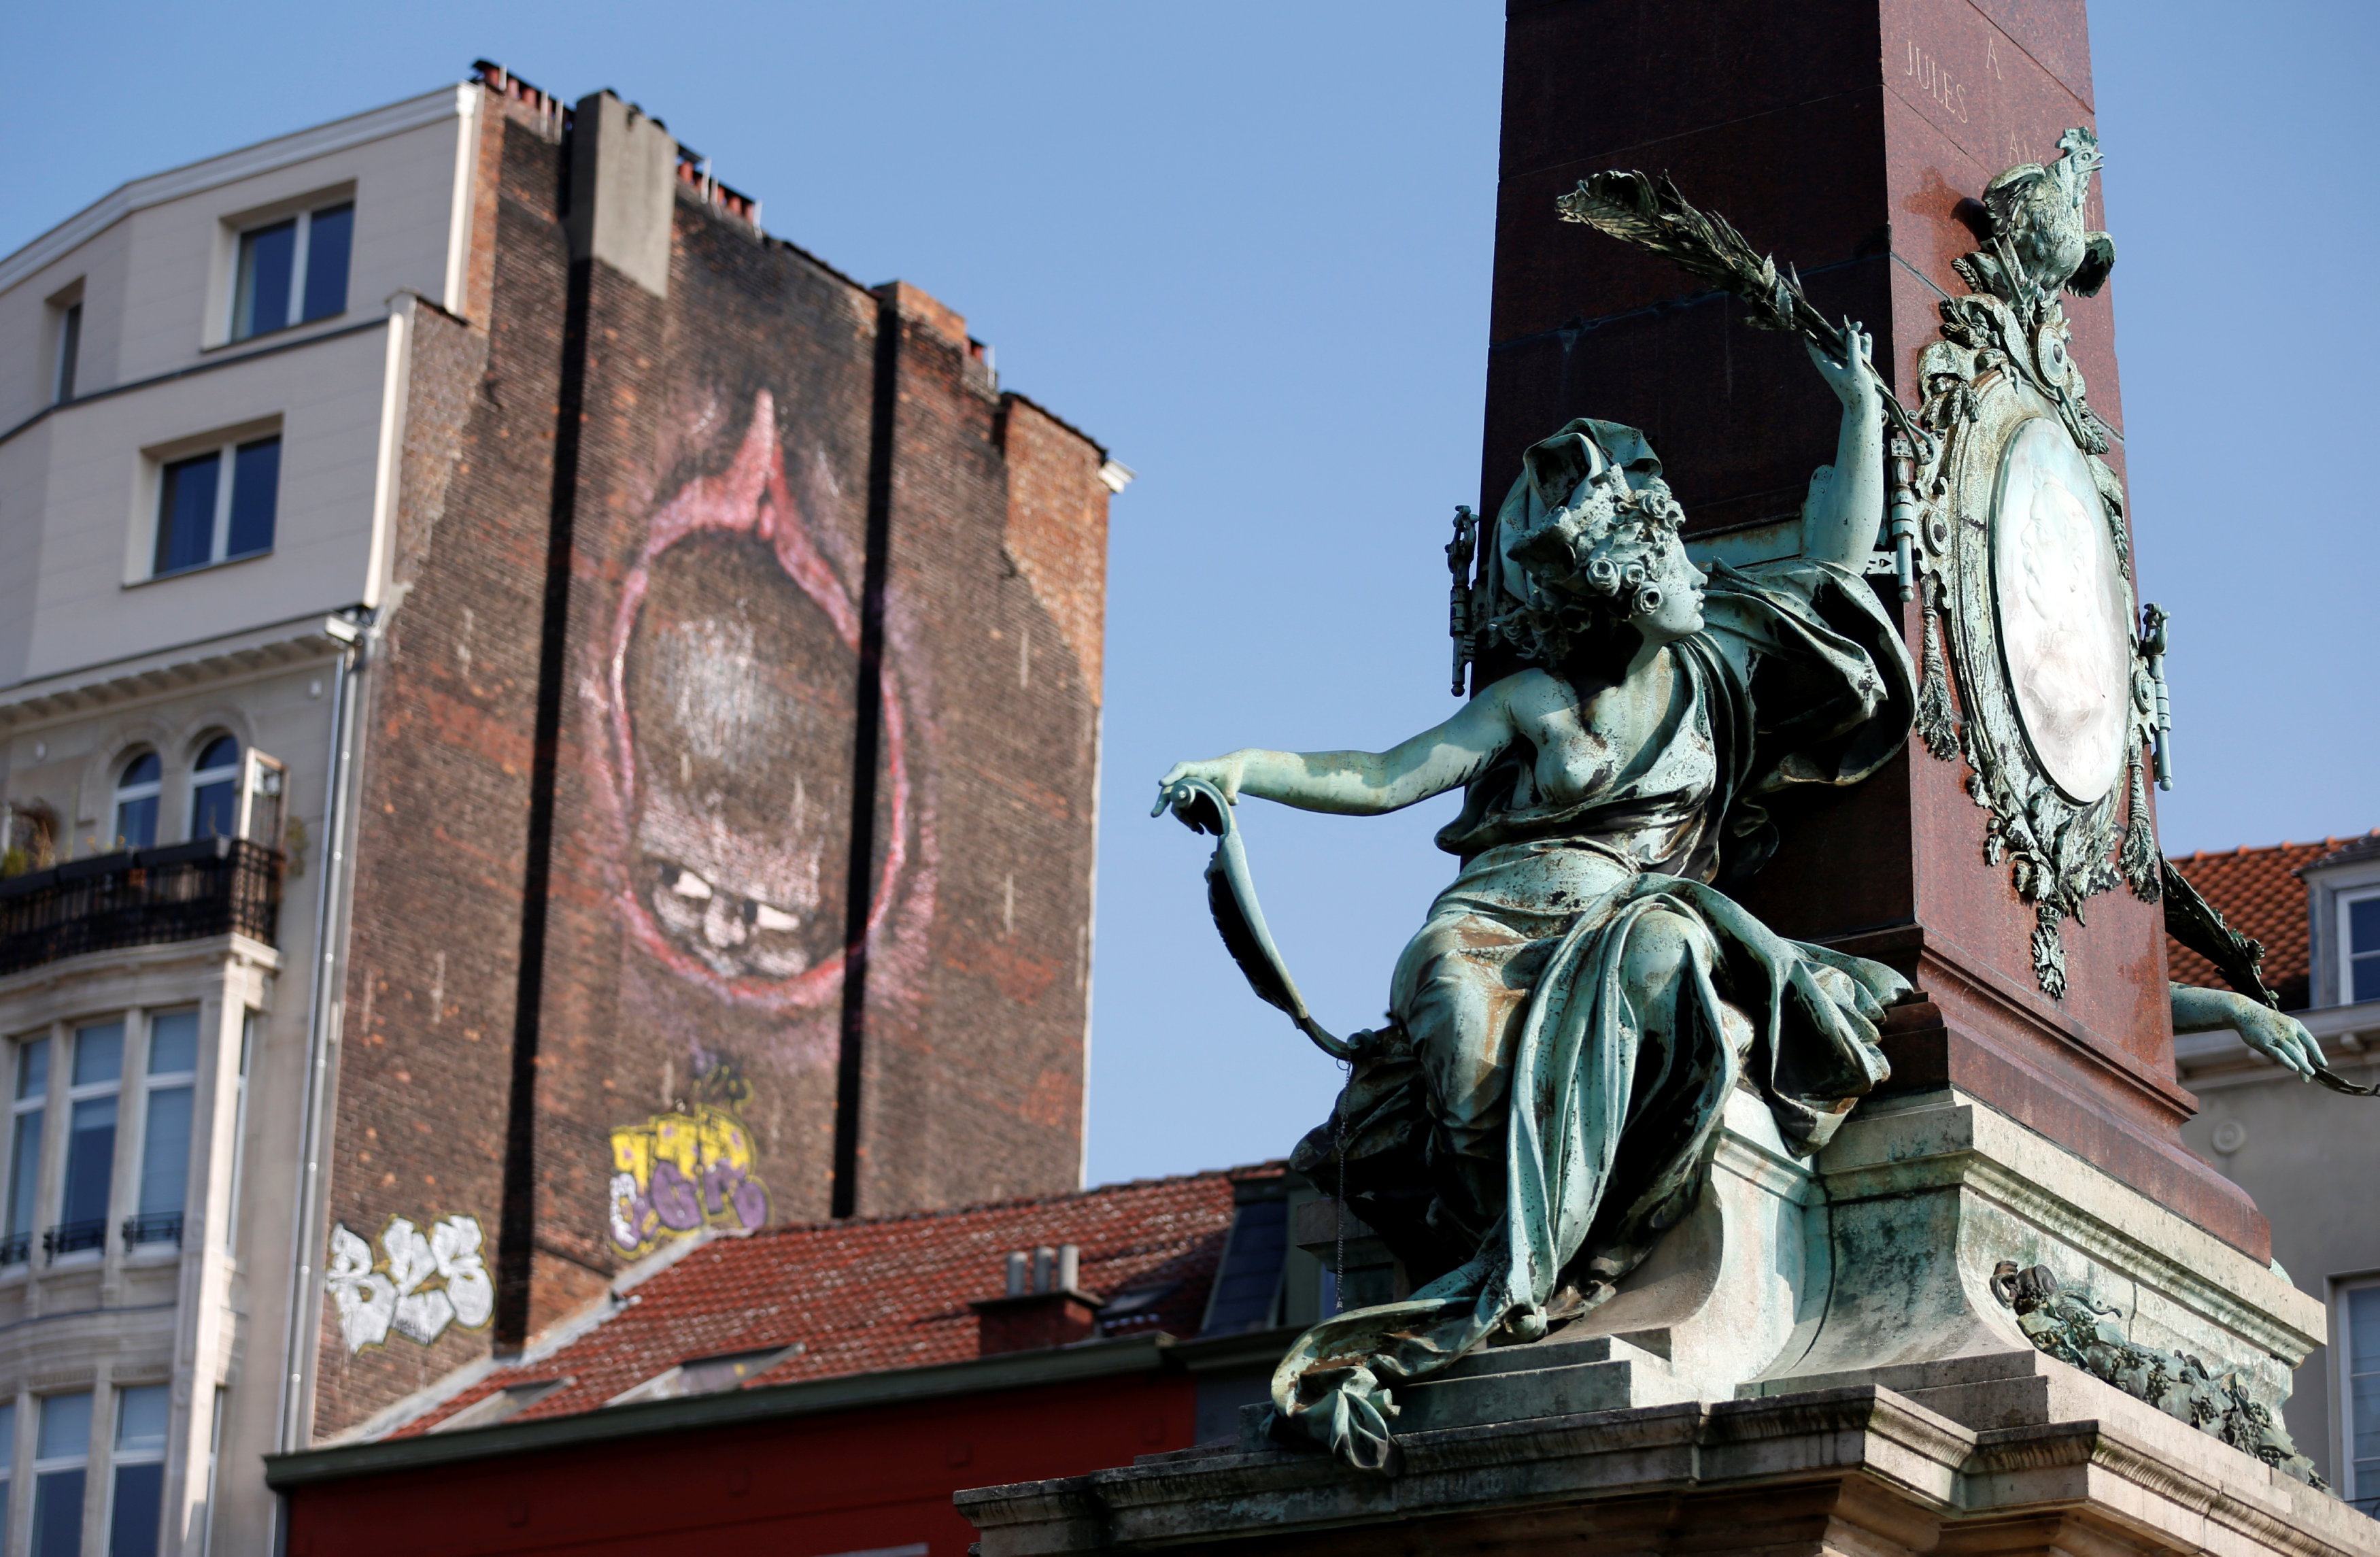 A sculpture is seen near an explicit graffiti painted on the side of a building in central Brussels, Belgium, on October 11, 2016. Photo: Reuters